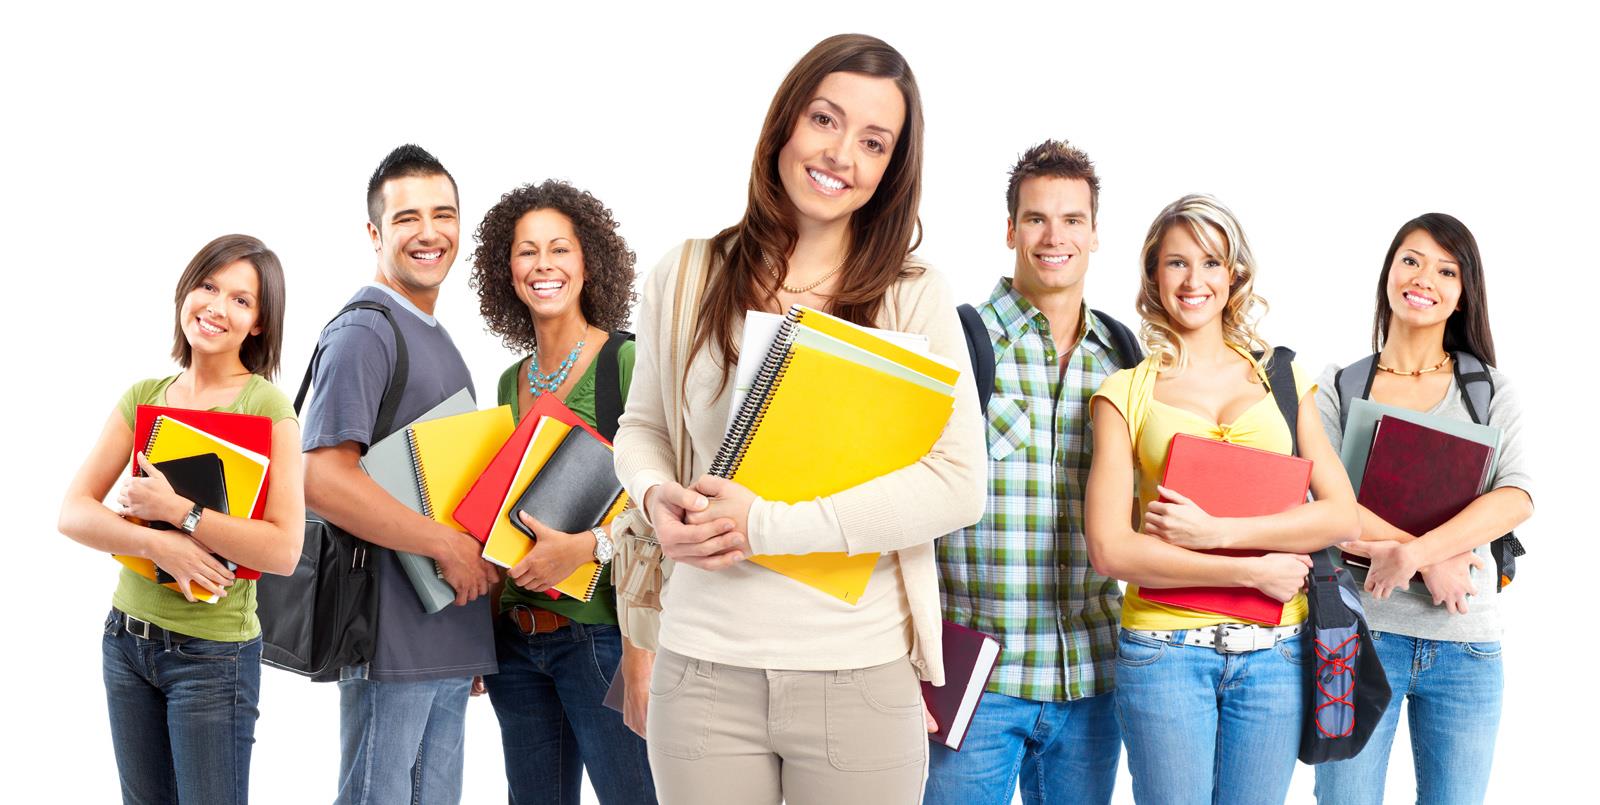 looking for assignment writers online, online tutor service